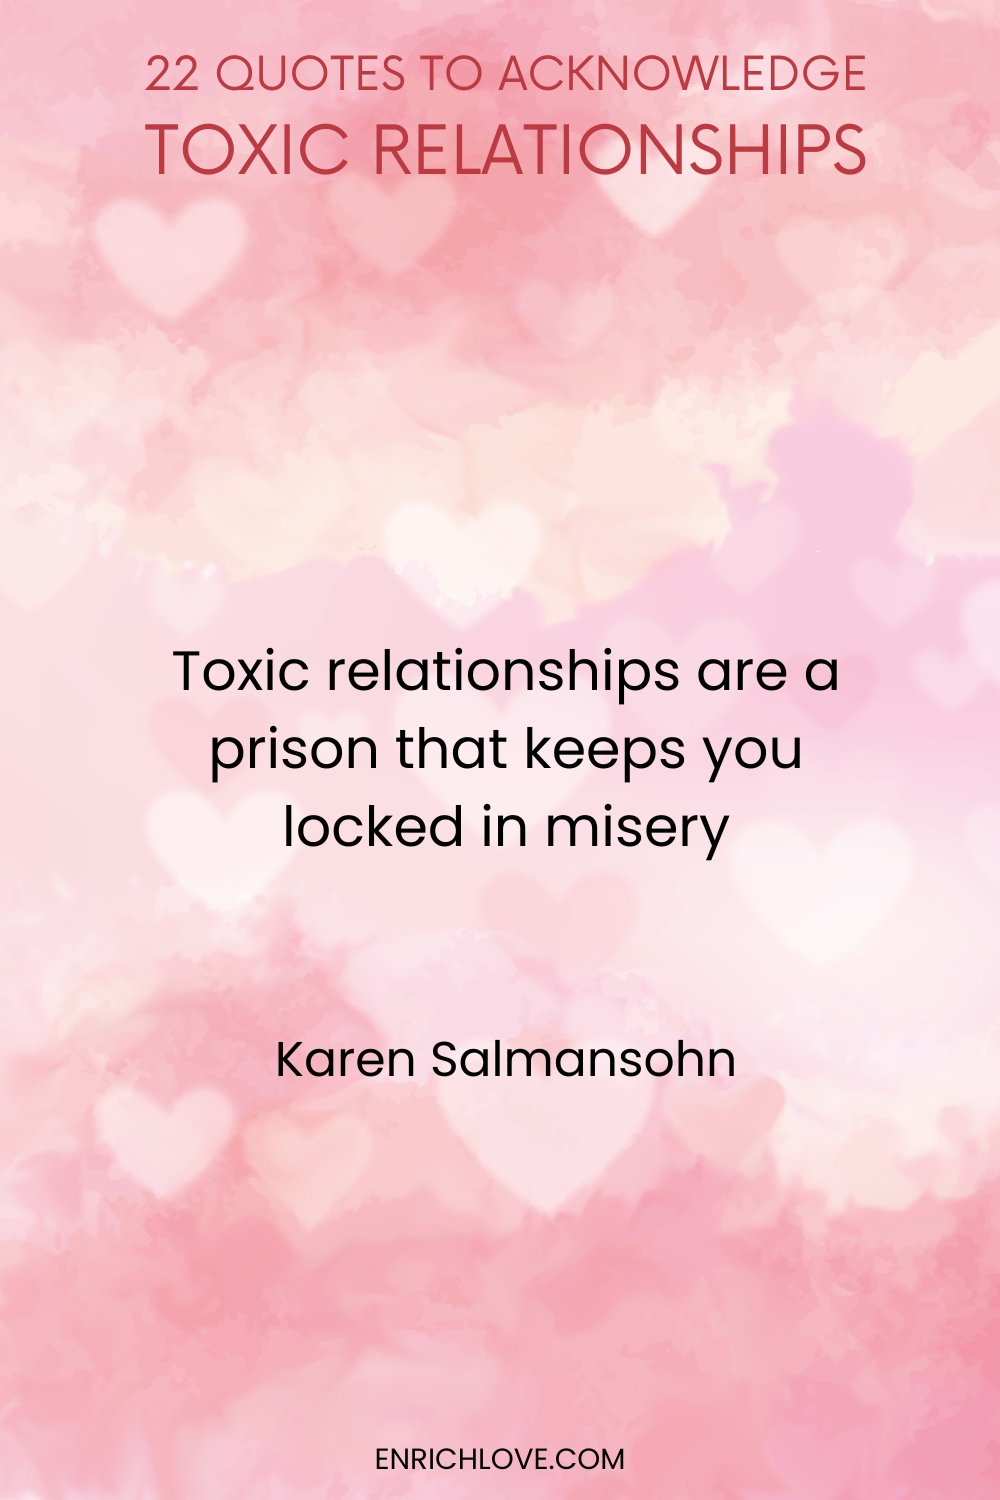 22 Quotes to Acknowledge Toxic Relationships -Toxic relationships are a prison that keeps you locked in misery by Karen Salmansohn